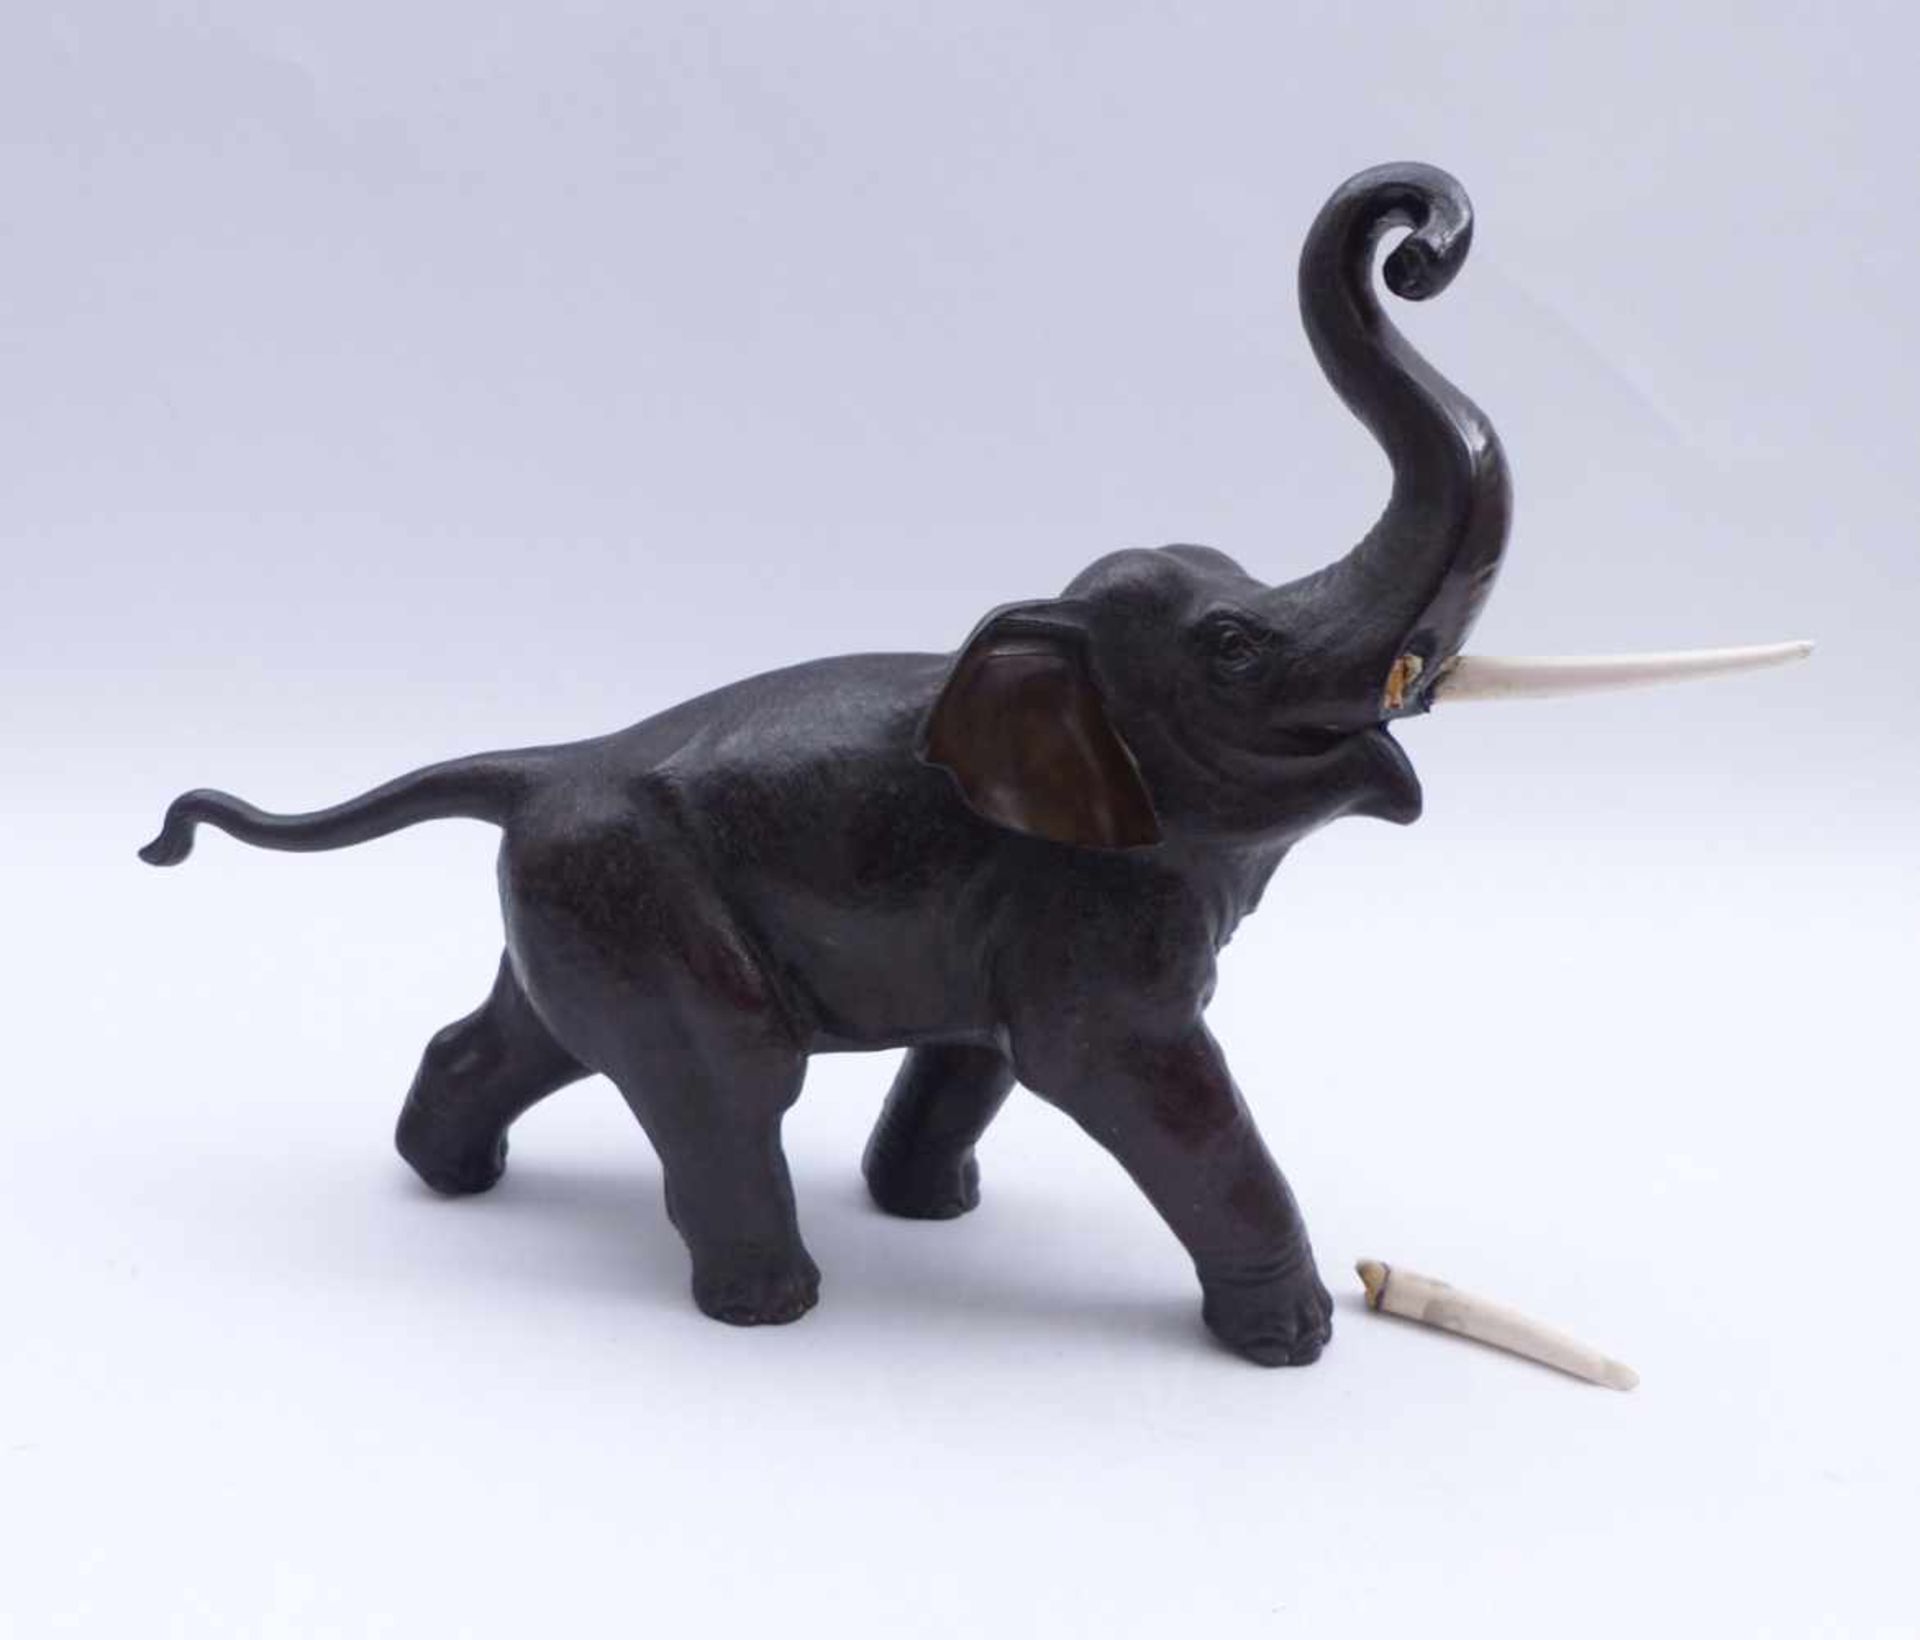 Walking ElephantJapan, Meiji period - around 1900Fully plastic, realistically formed figure with